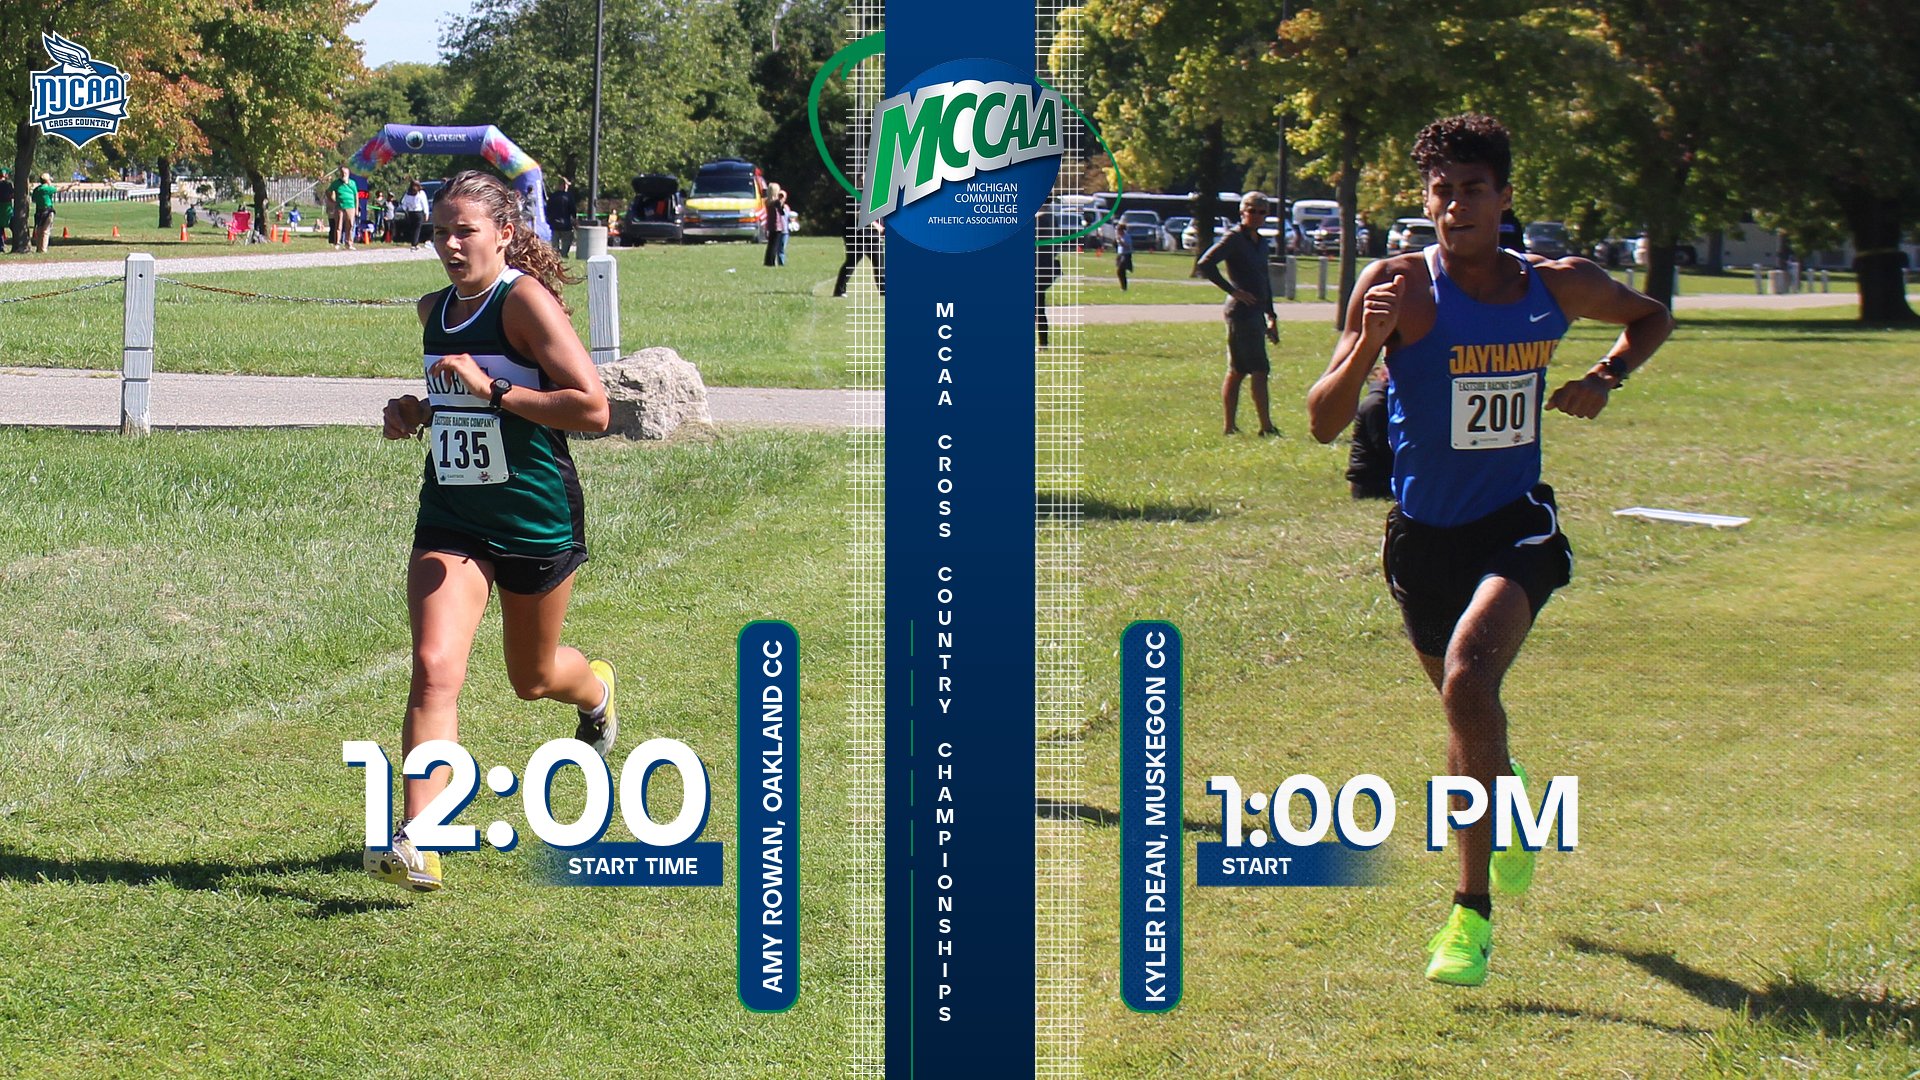 MCCAA Men's and Women's Cross Country Championship are Satufday.